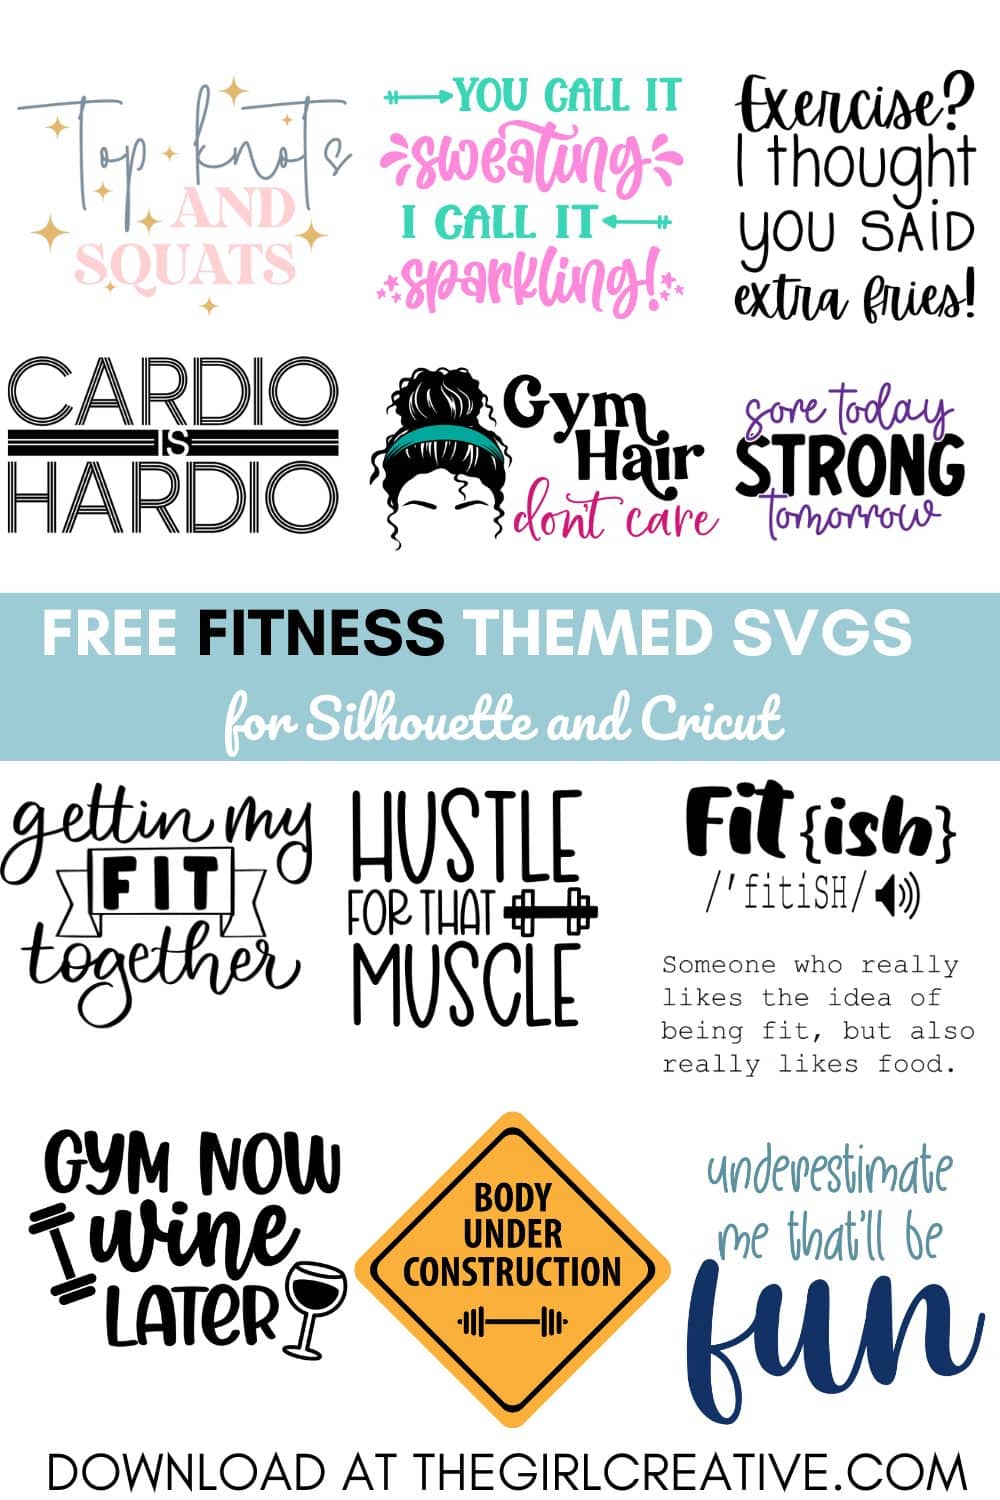 https://www.thegirlcreative.com/wp-content/uploads/2022/12/gym-quotes-collage-2.jpg